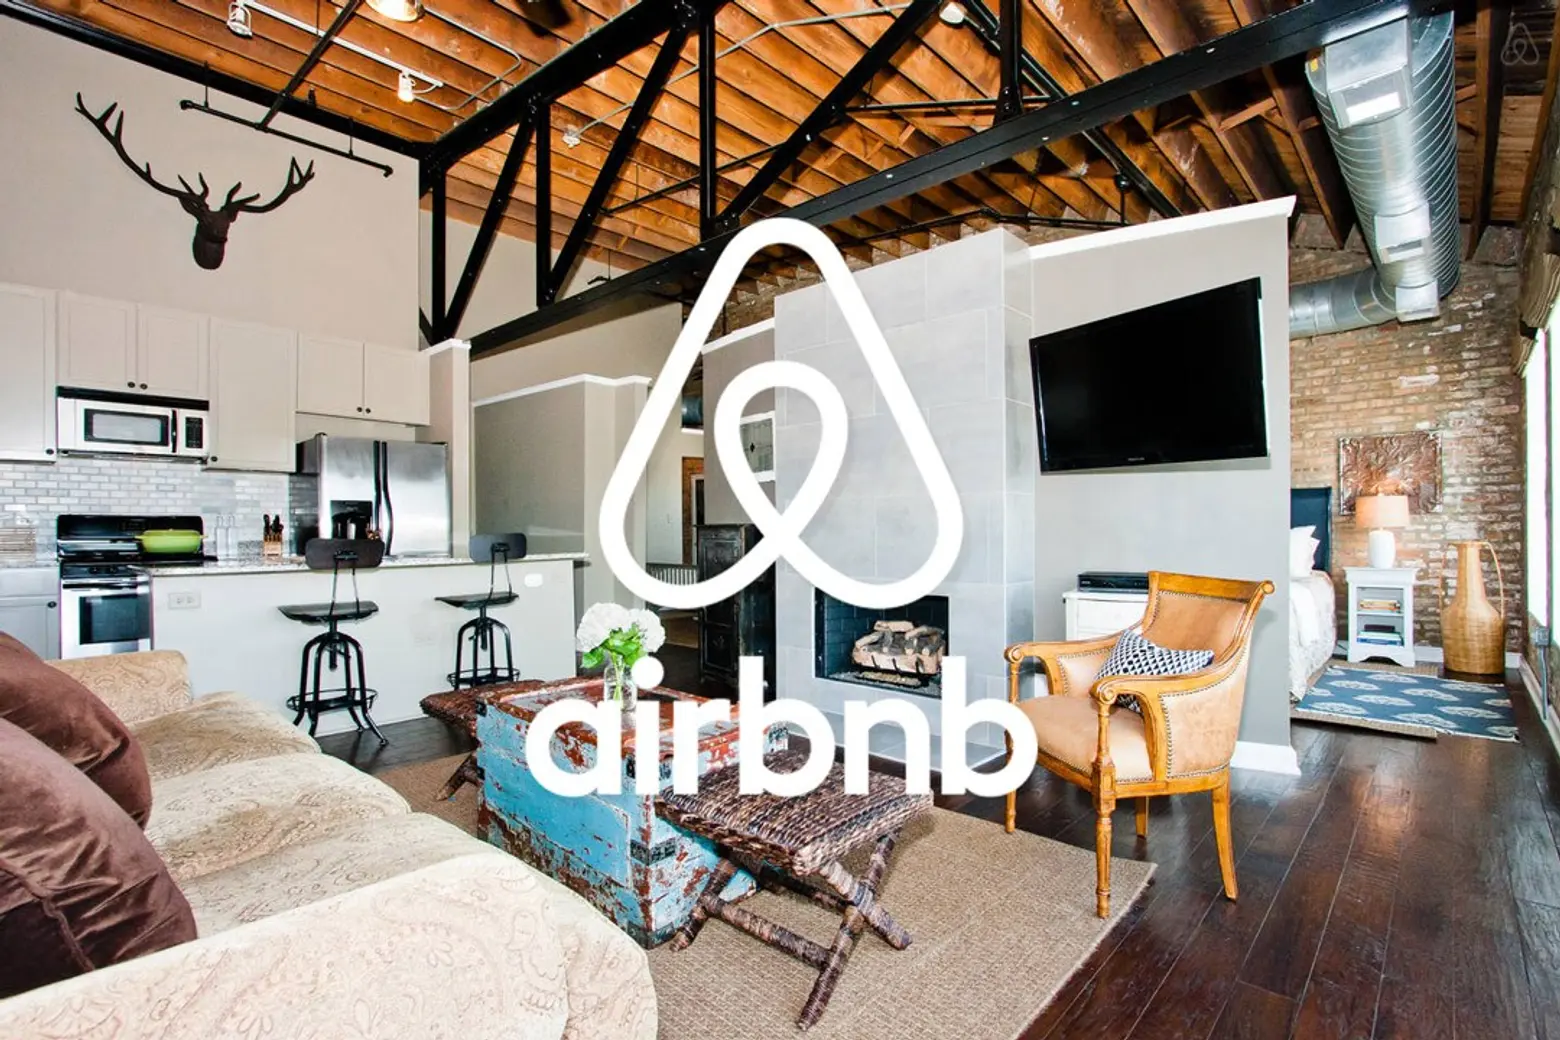 At $31B, Airbnb now second most valuable private company behind Uber